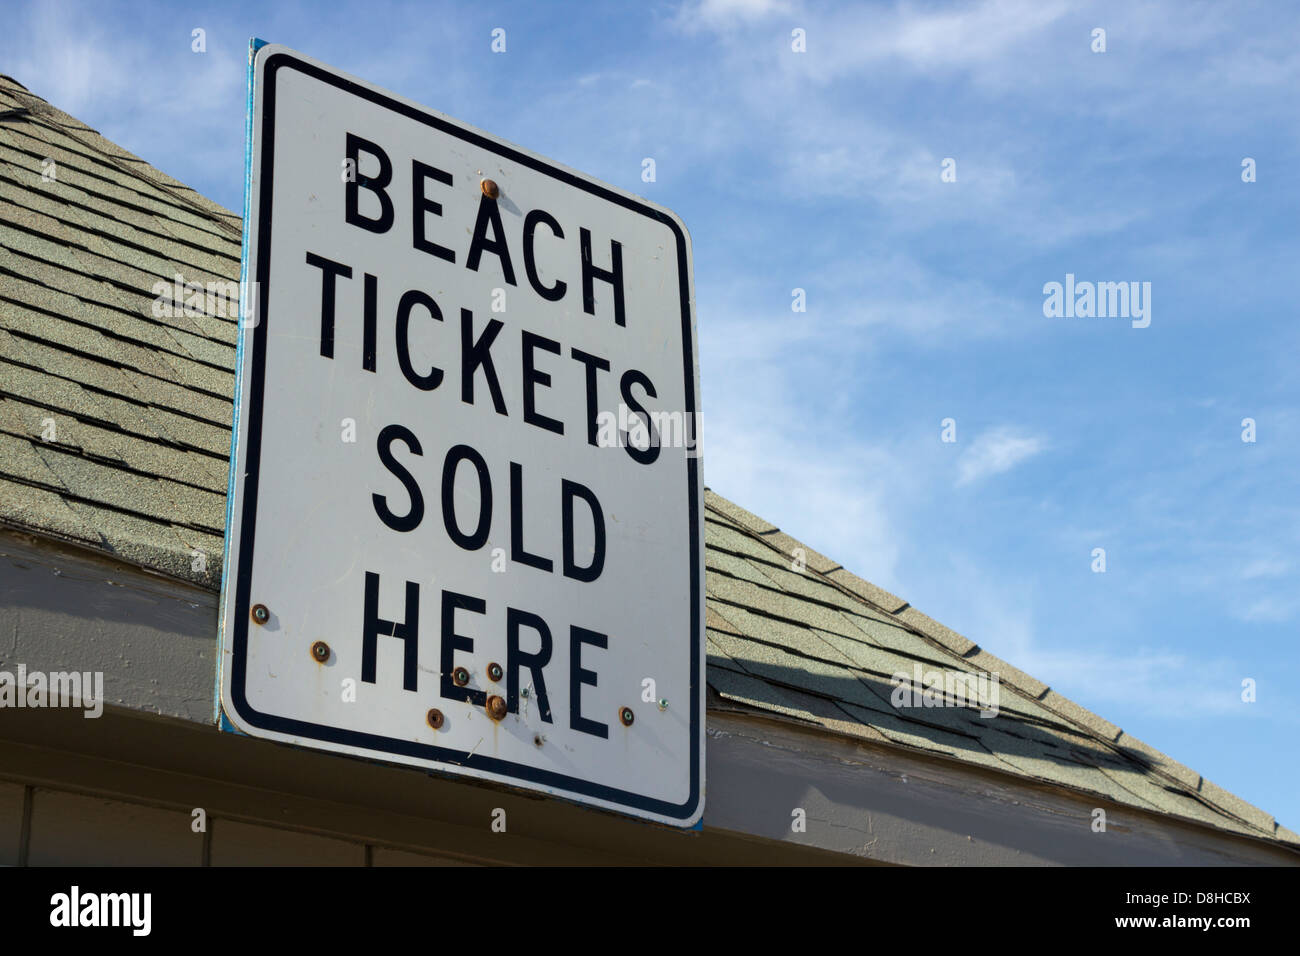 Beach tickets sold here sign, Jersey Shore, Asbury Park, New Jersey, USA Stock Photo